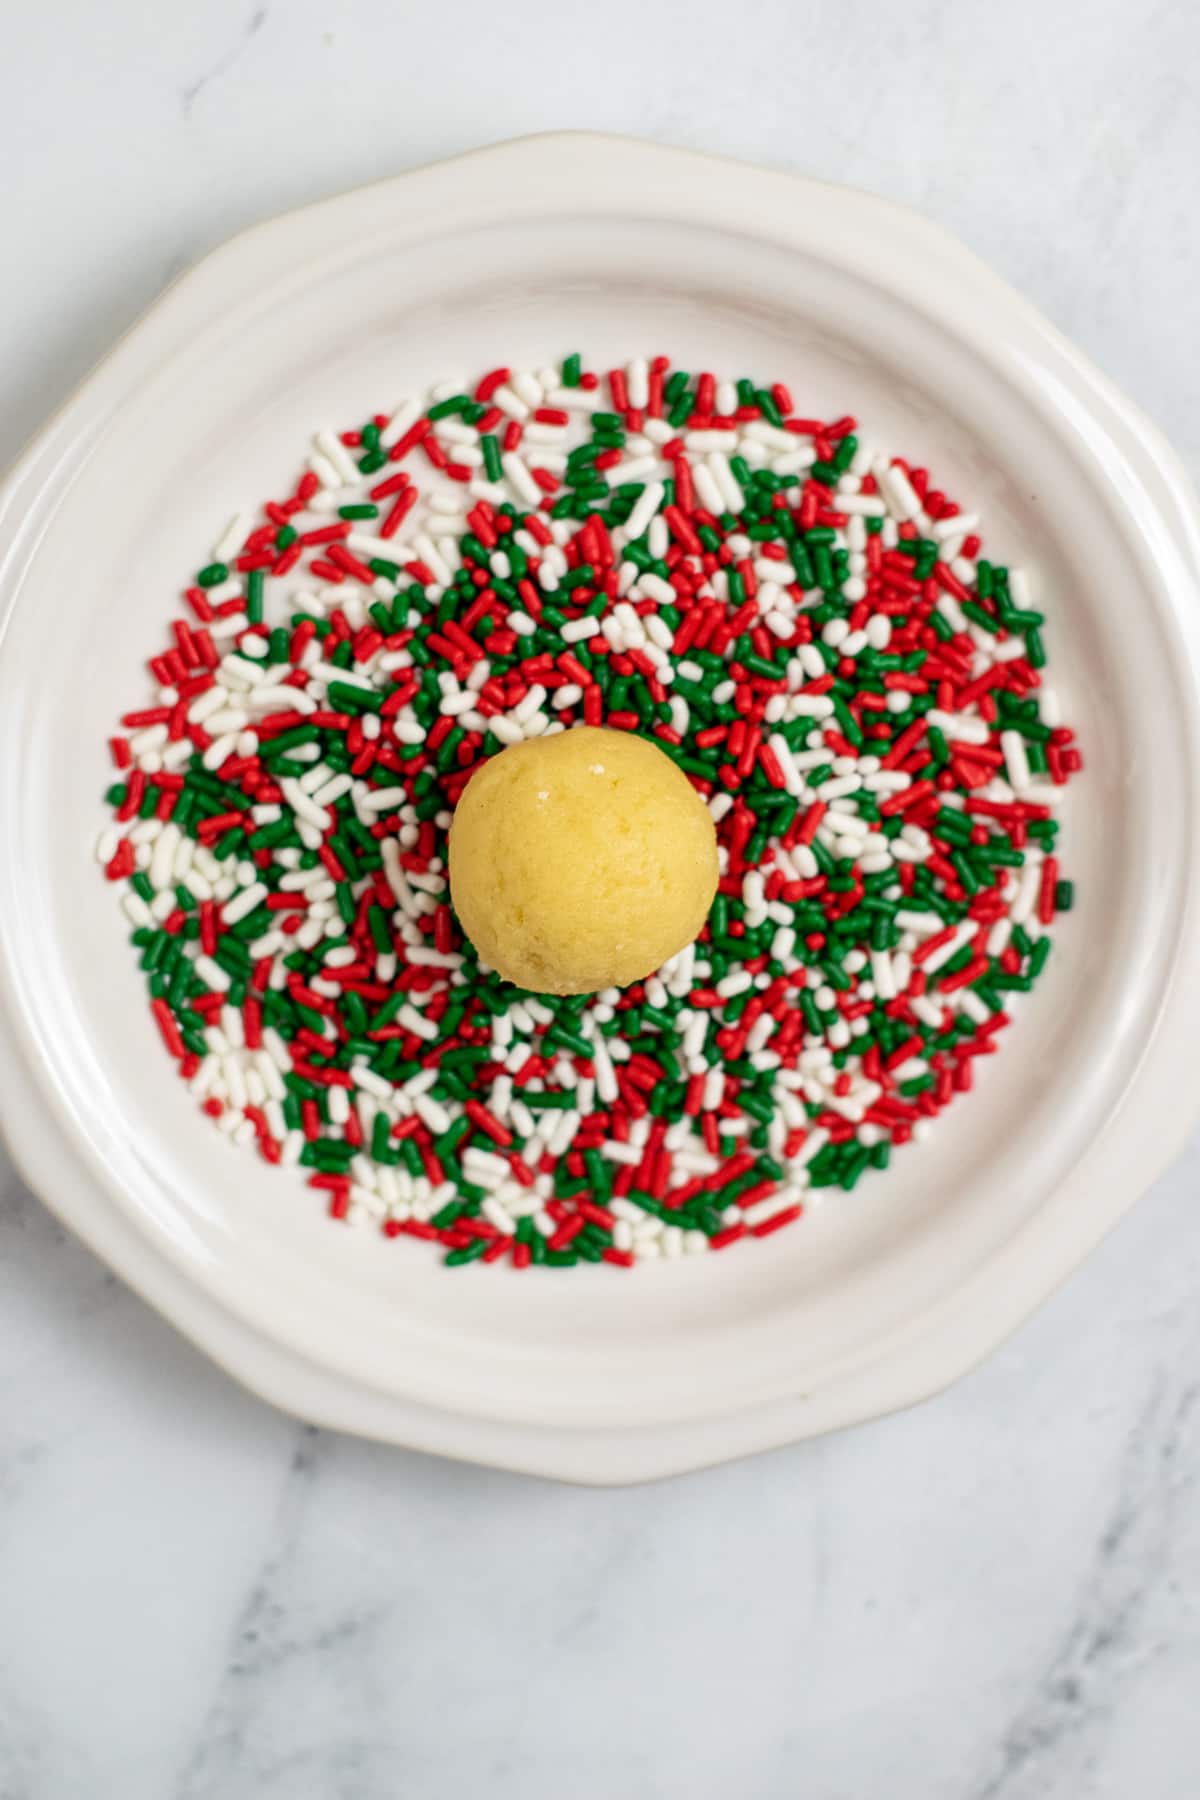 Another process in Christmas Sprinkle Cookie Recipe is to roll the dough ball over sprinkles